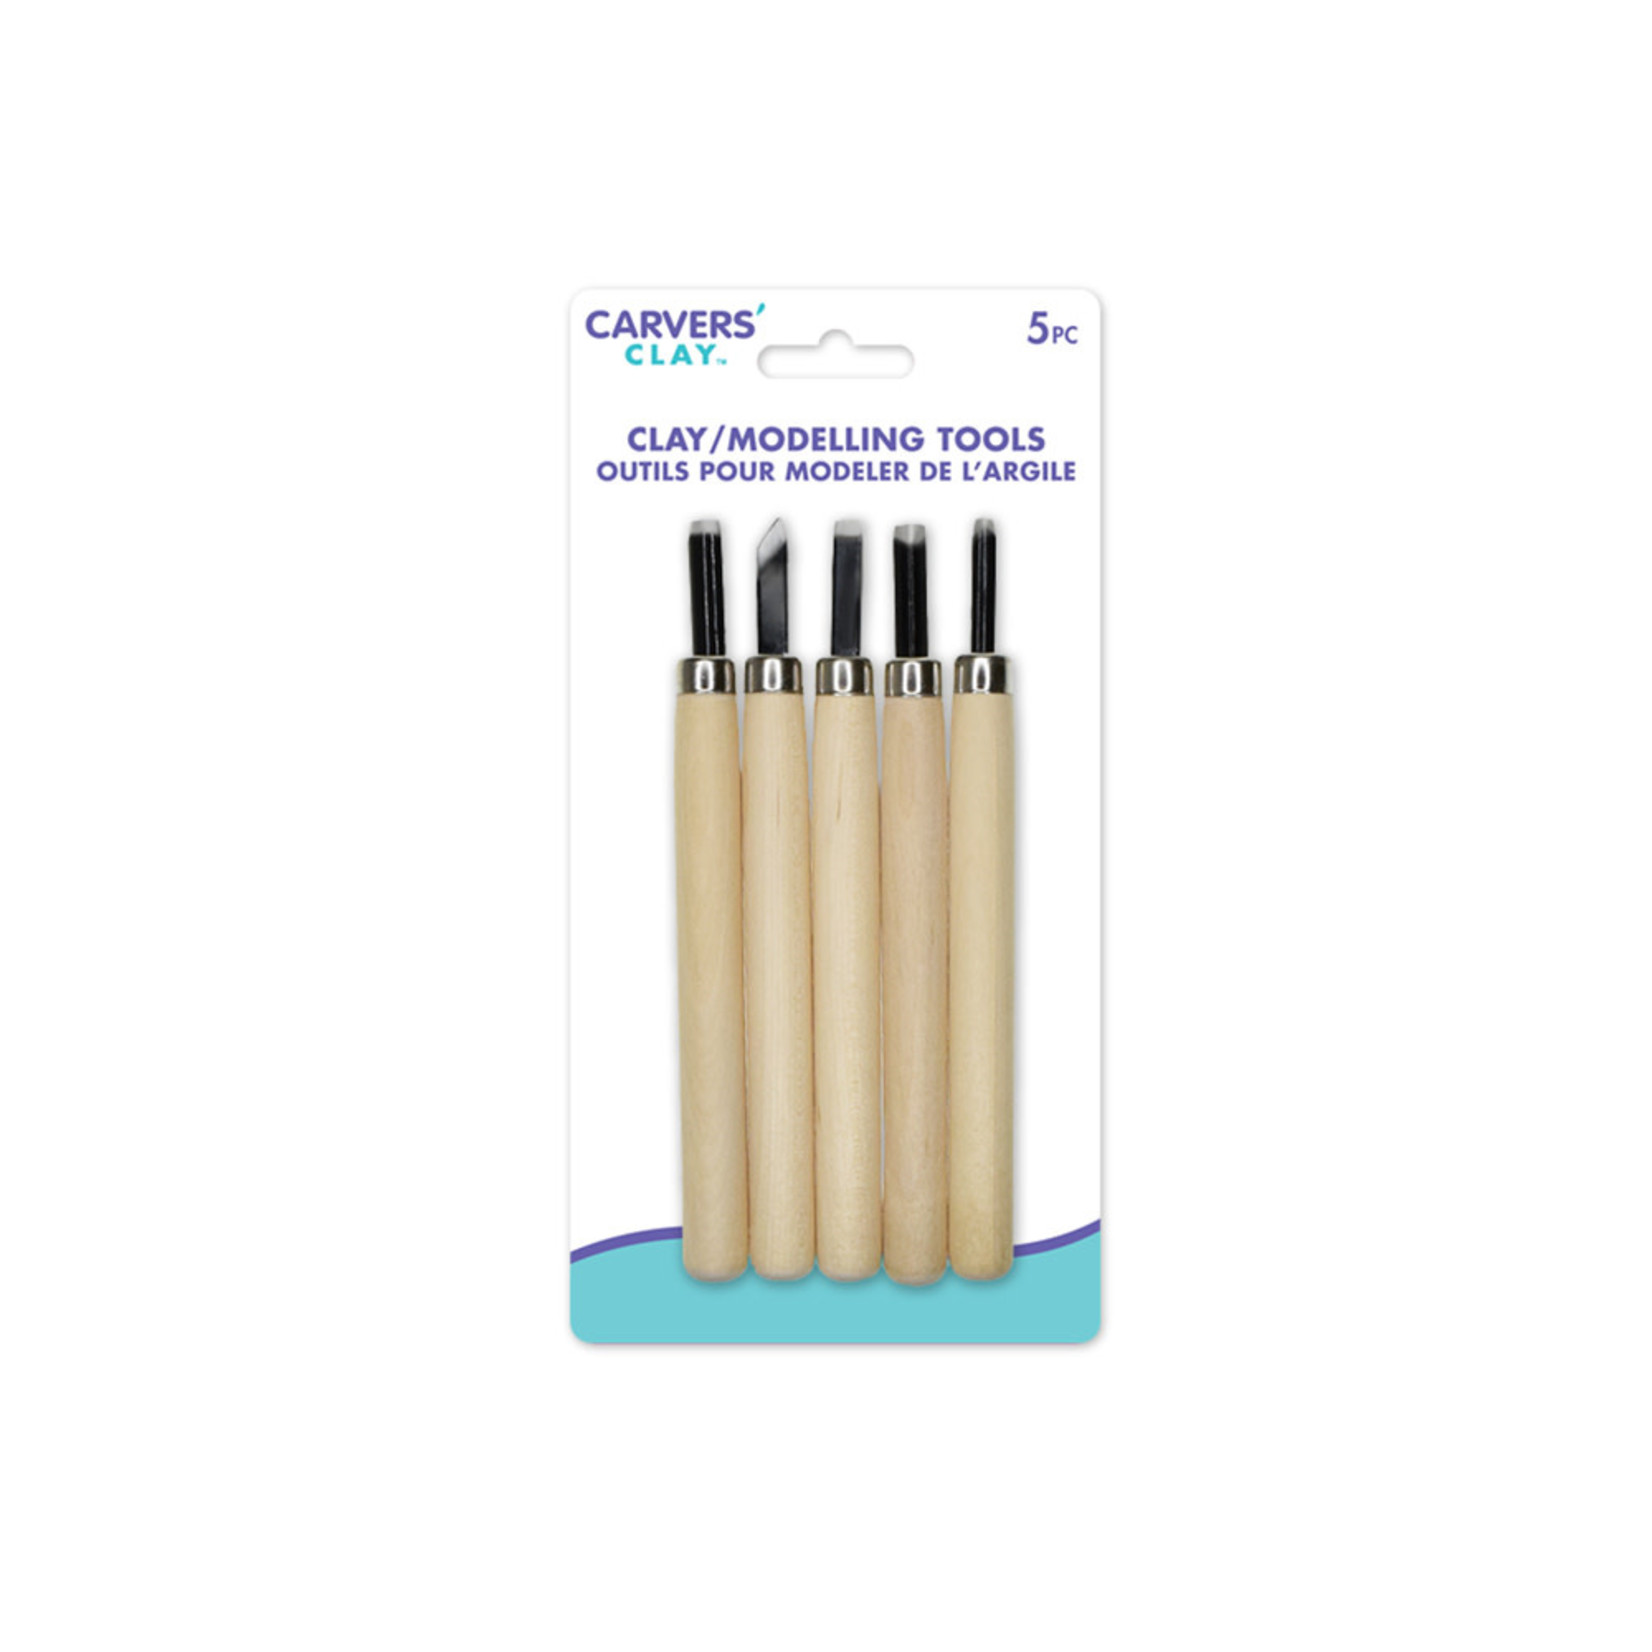 CARVERS' CLAY: CARVING/SCULPTING/MODELLING TOOLS SET 5PC ASST